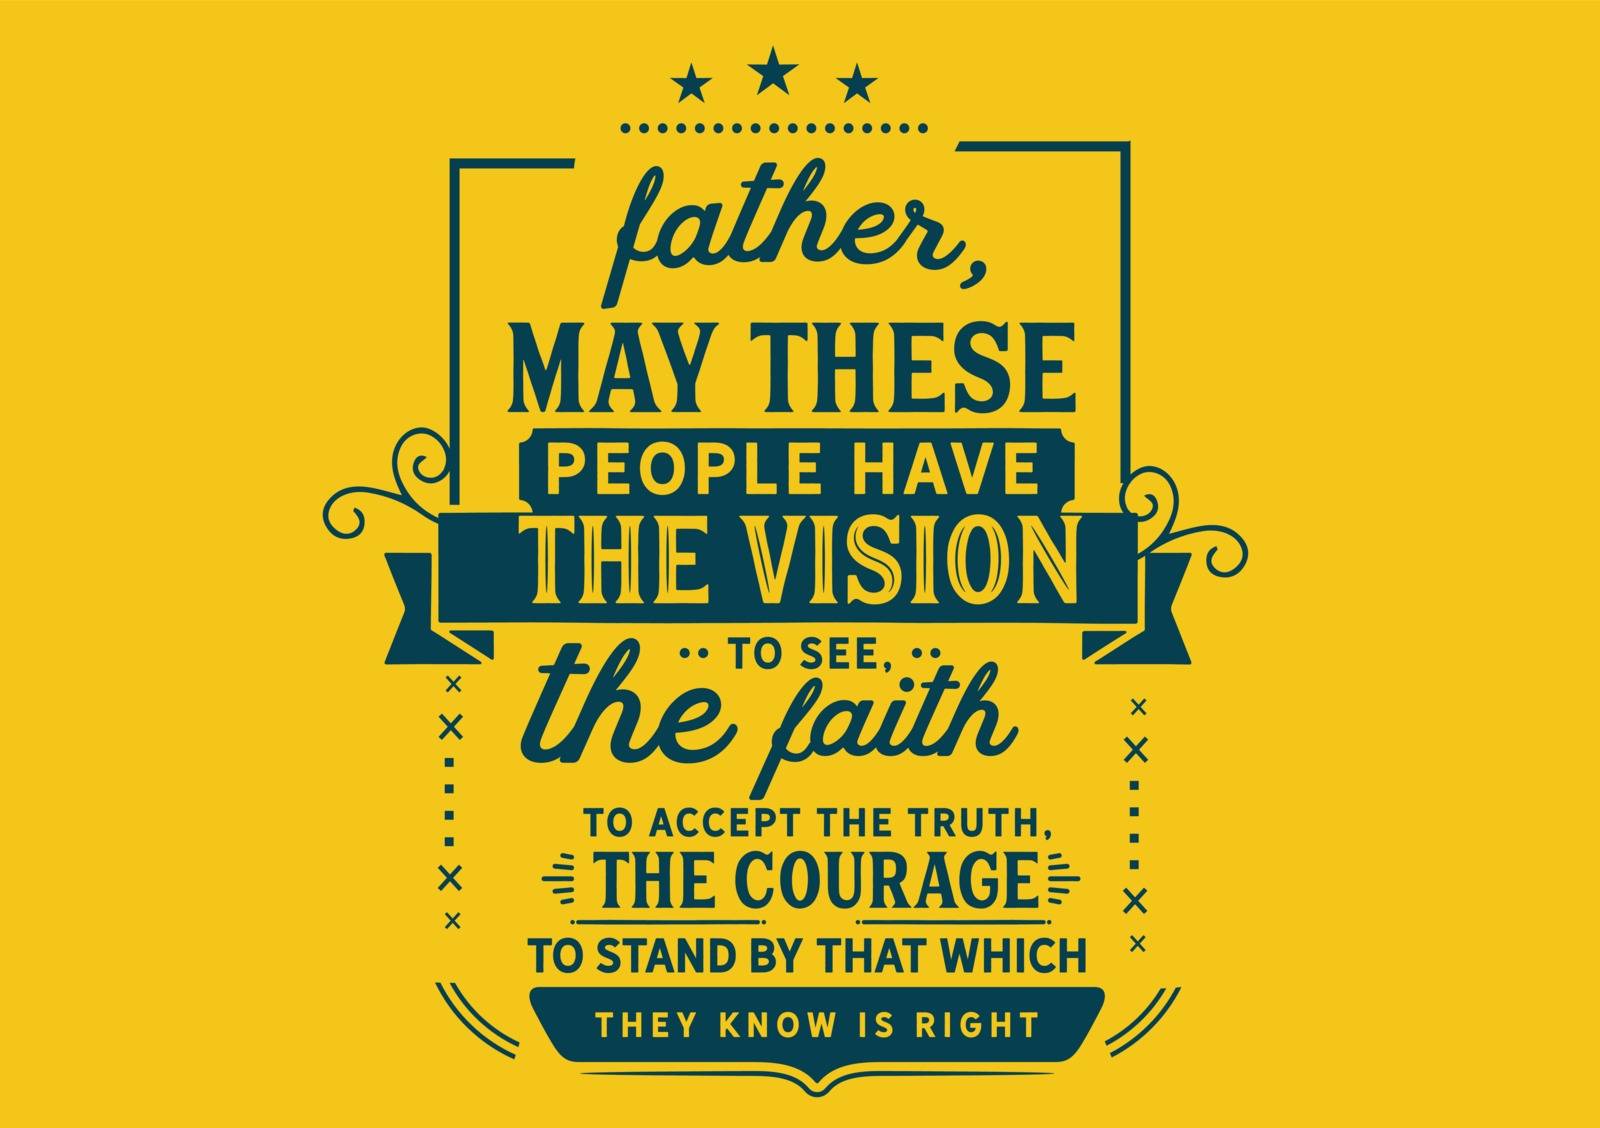 Father, may these people have the vision to see, the faith to accept the truth, the courage to stand by that which they know is right.